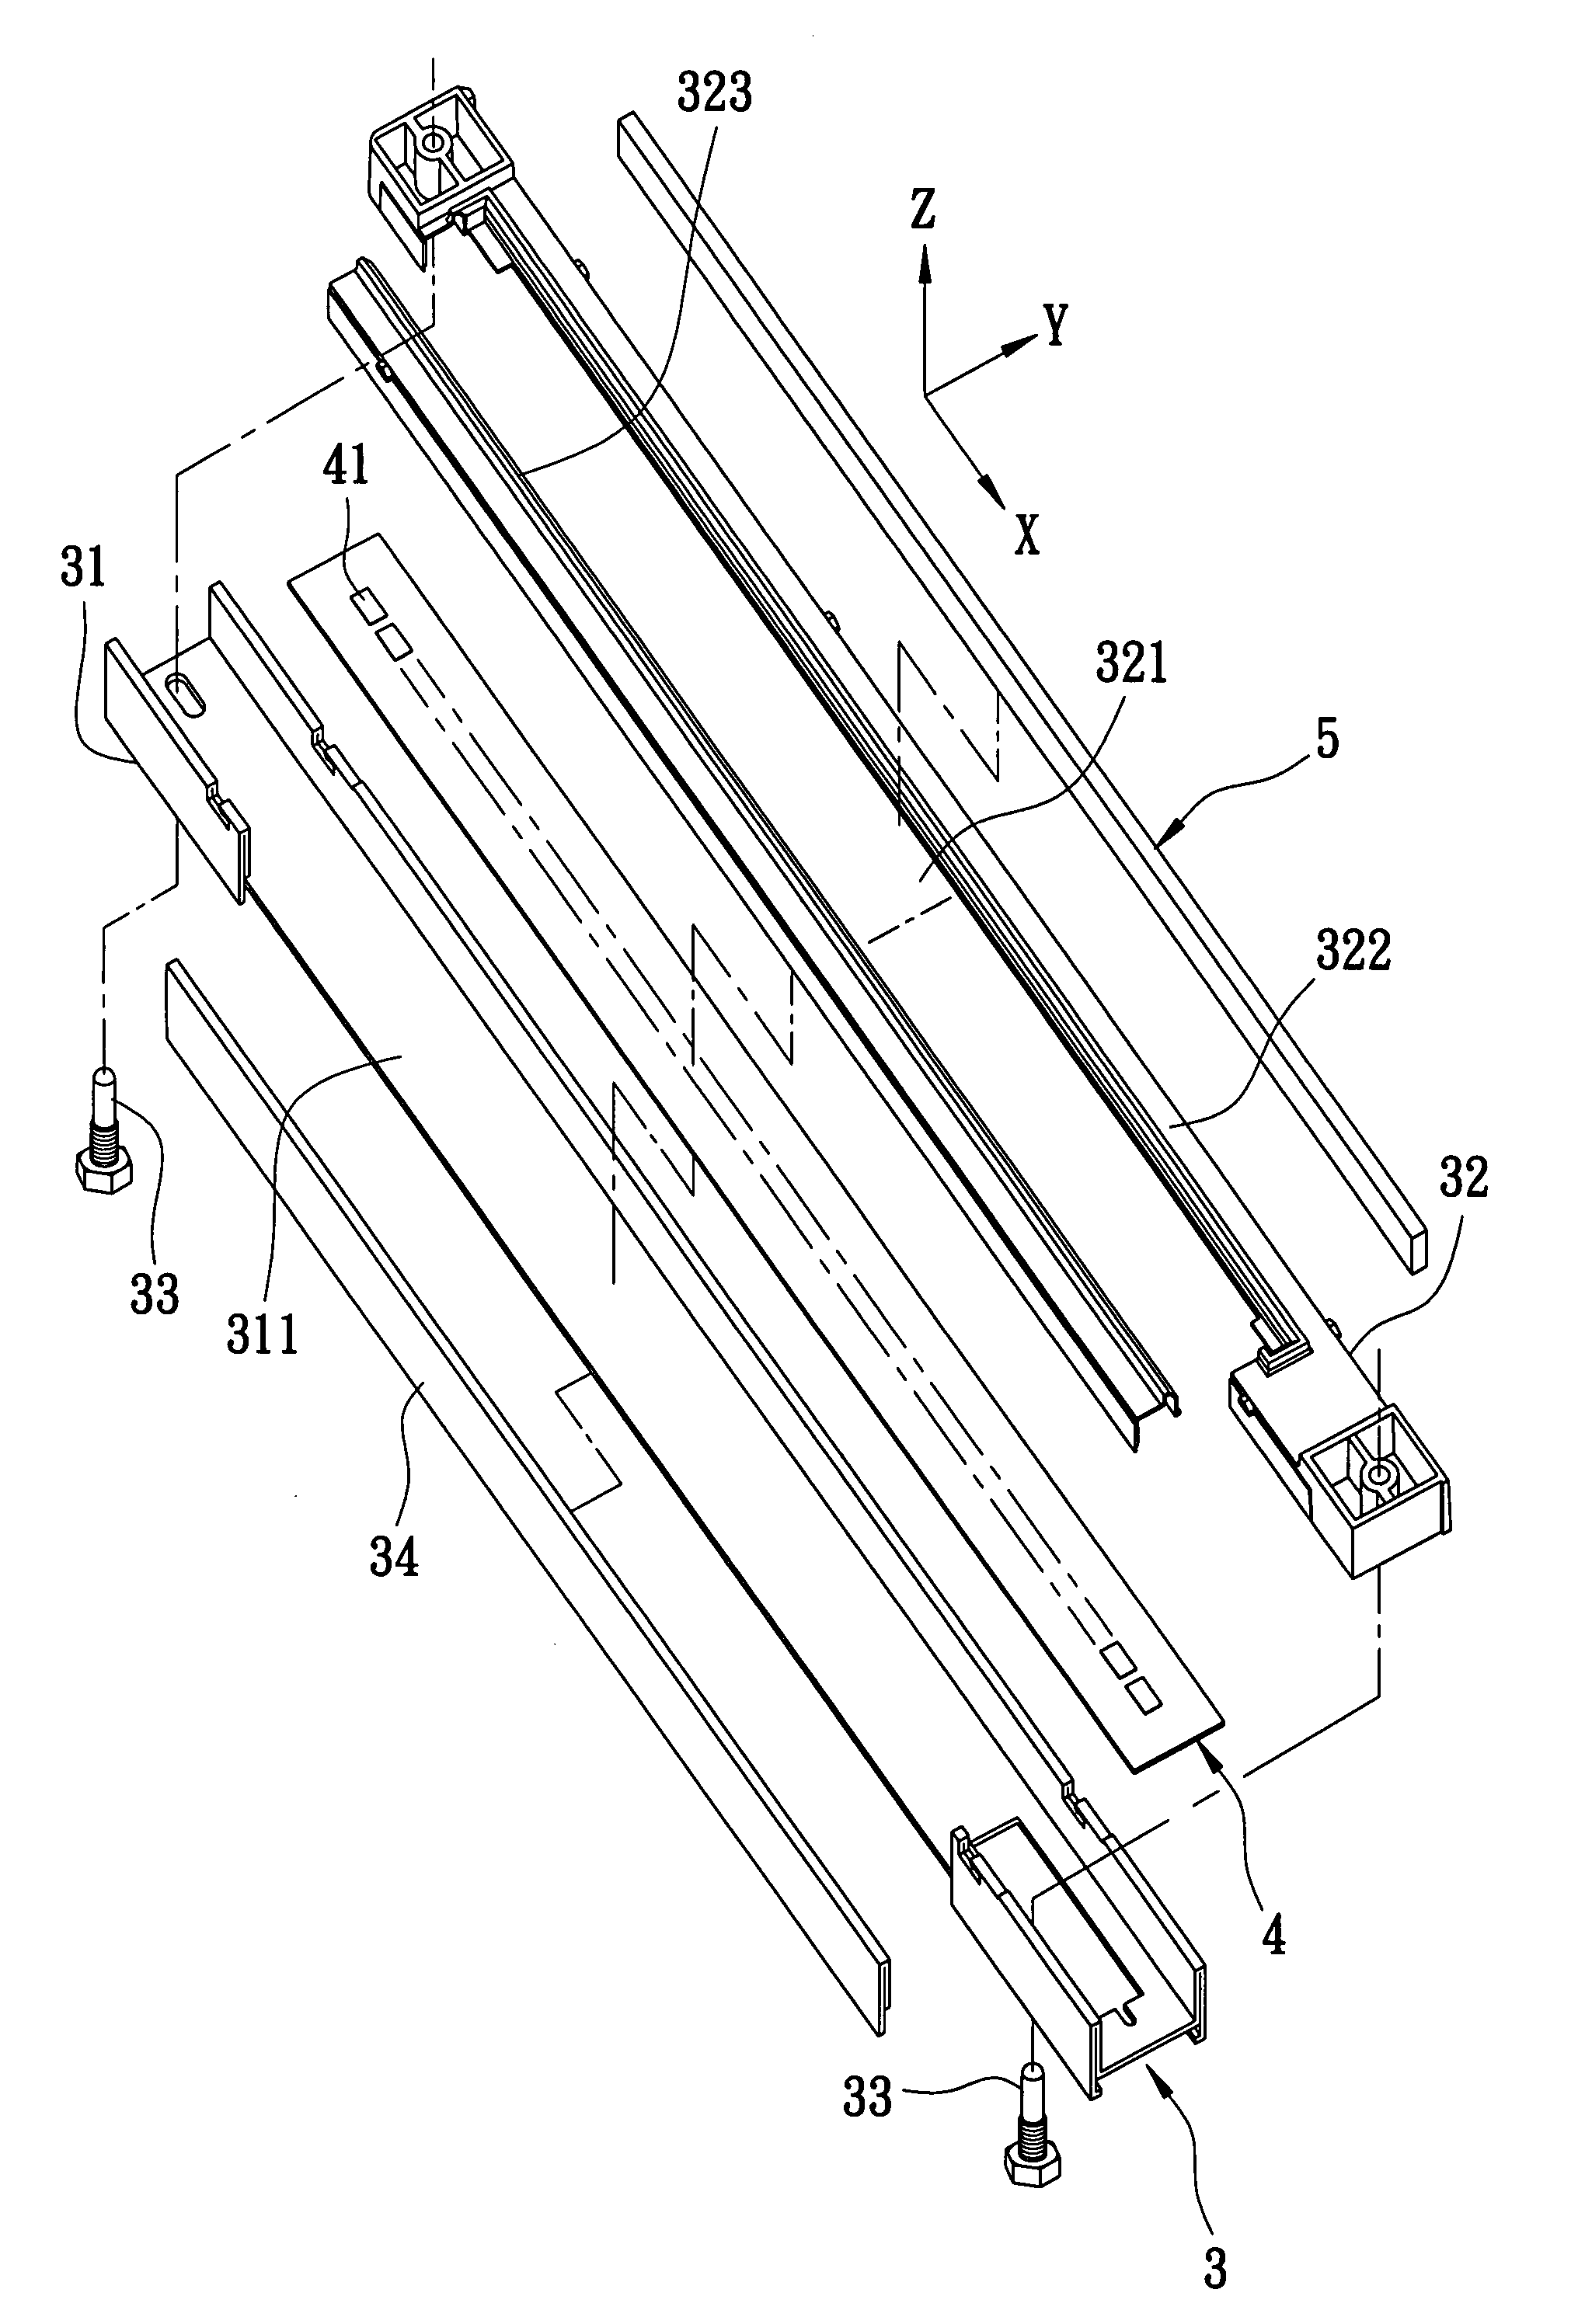 Optical module and methods for optically aligning and assembling the same